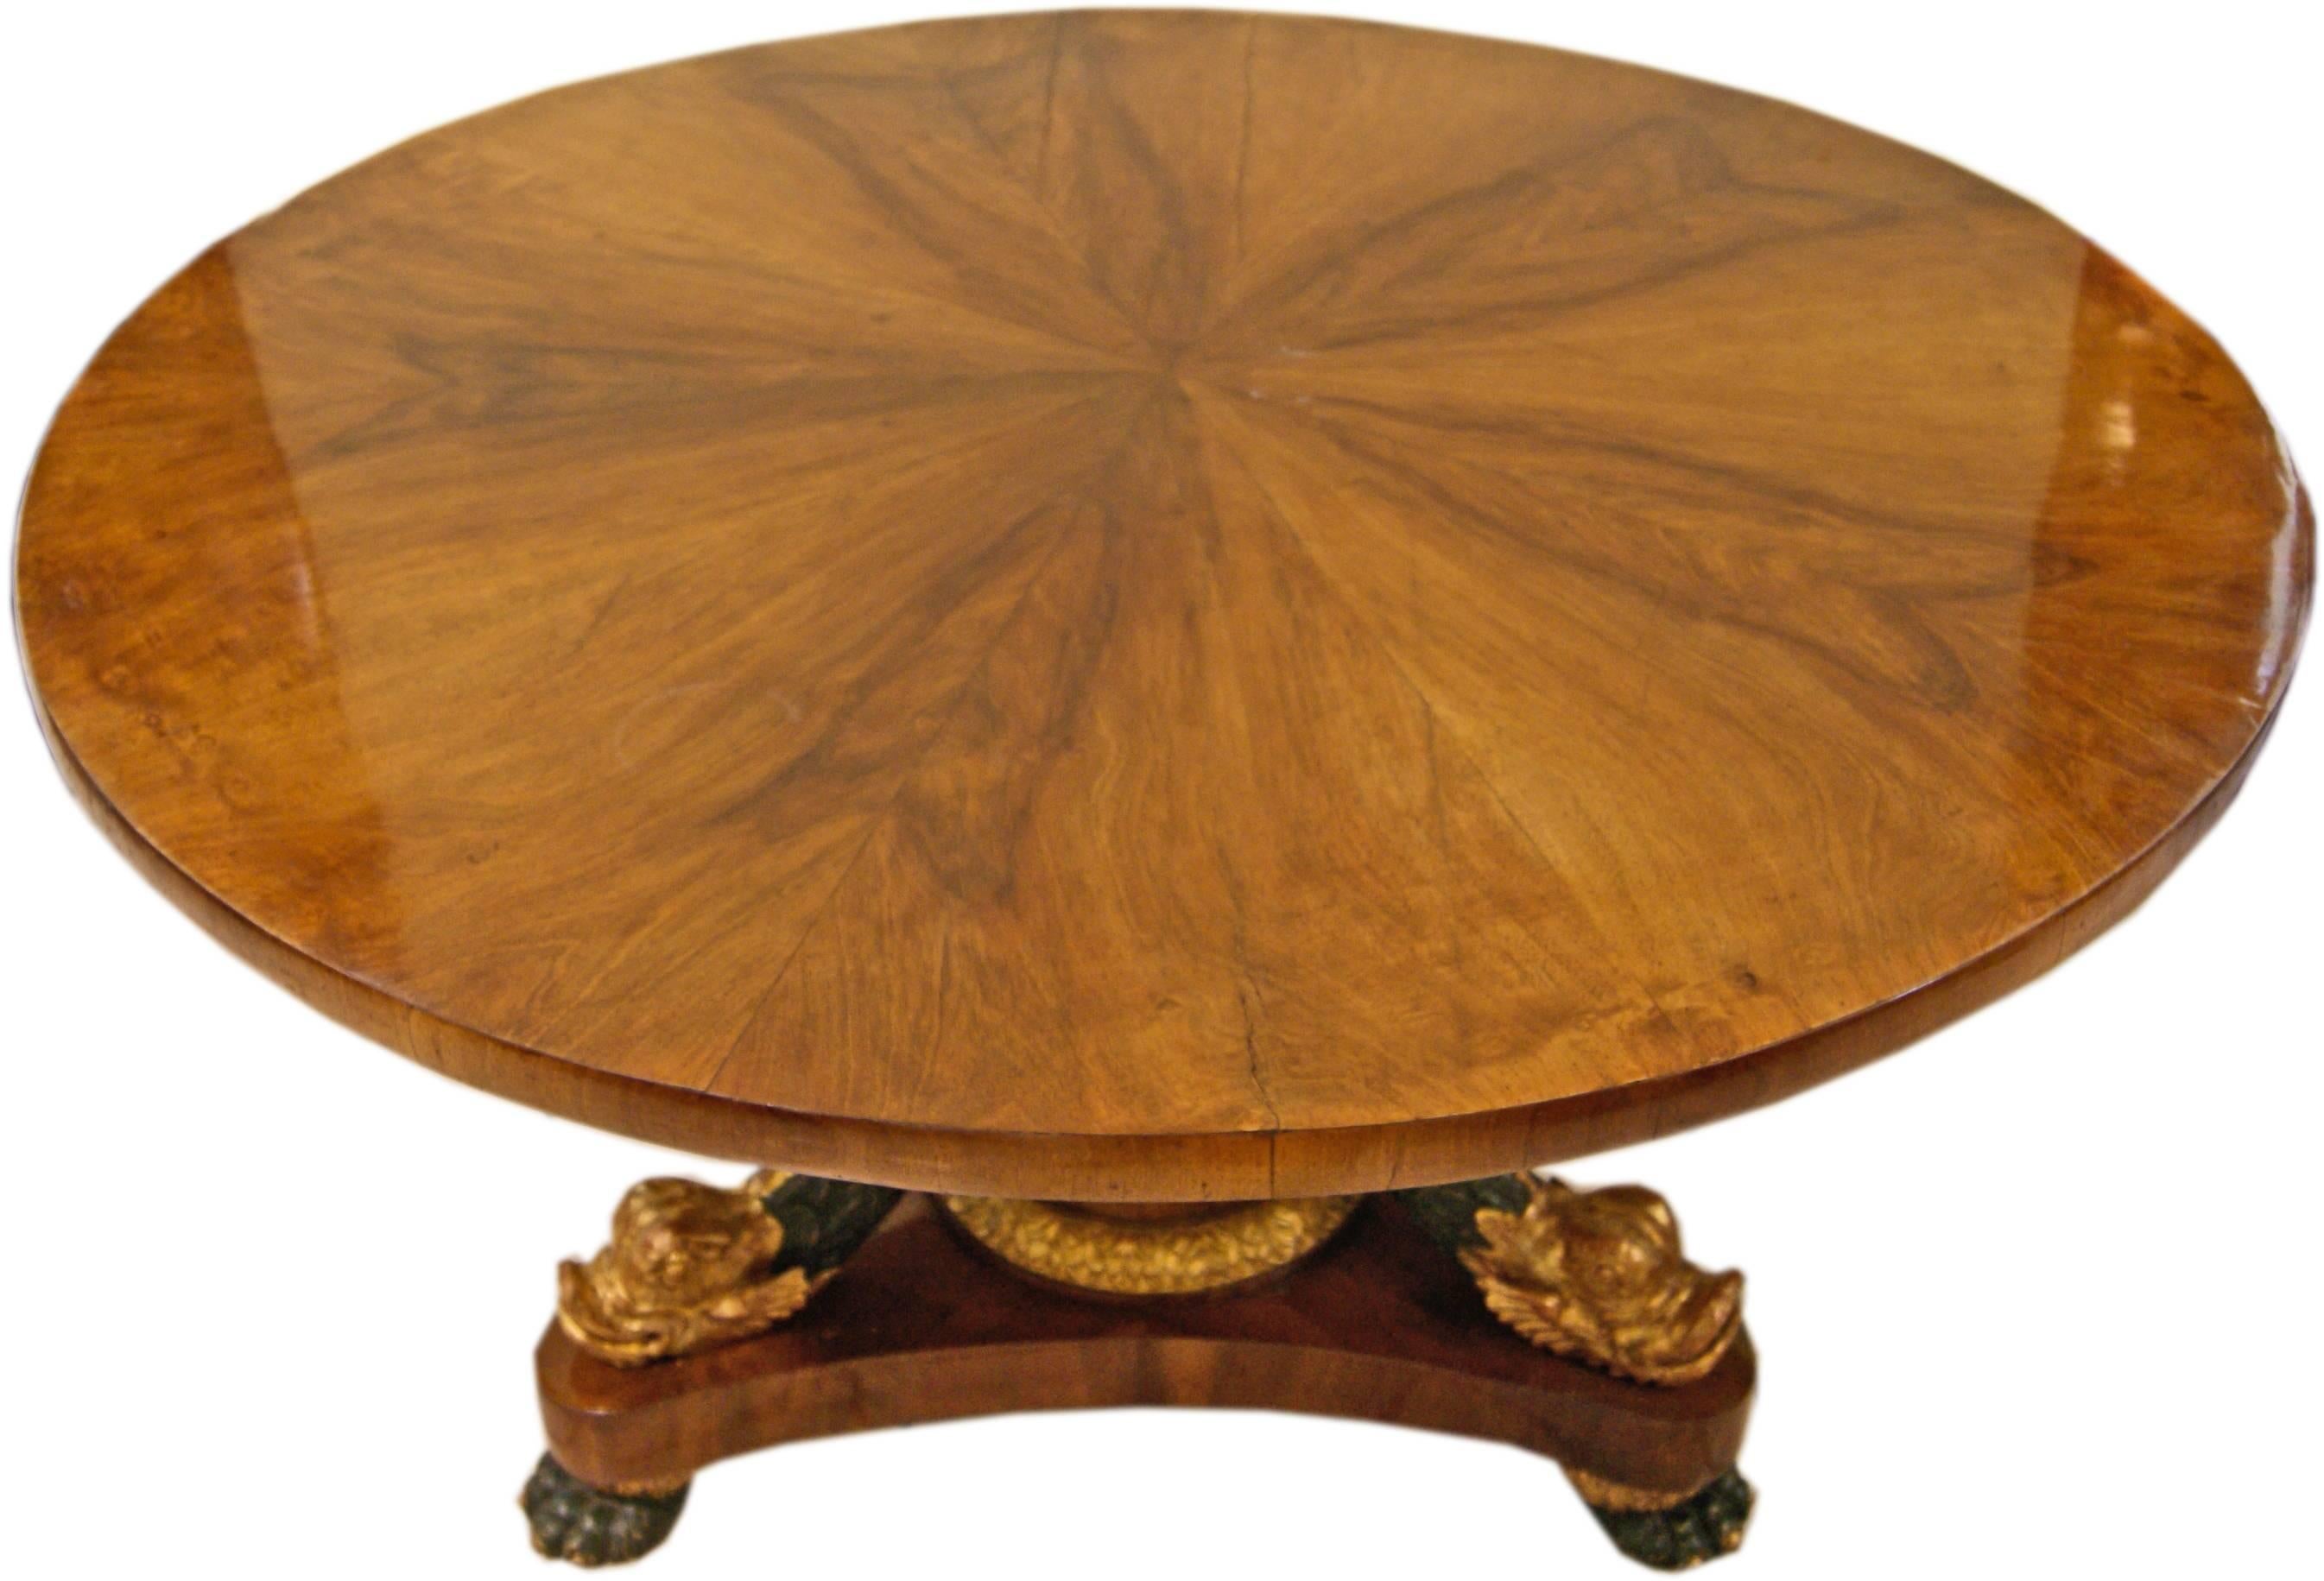 Biedermeier Vienna gorgeous table for parlor 
(authenticity guaranteed!).

Technique / material:
The table is made of massive wood (the table's plate and column have nut wood veneer). The abundant sculptured decorations are made of wood consisting